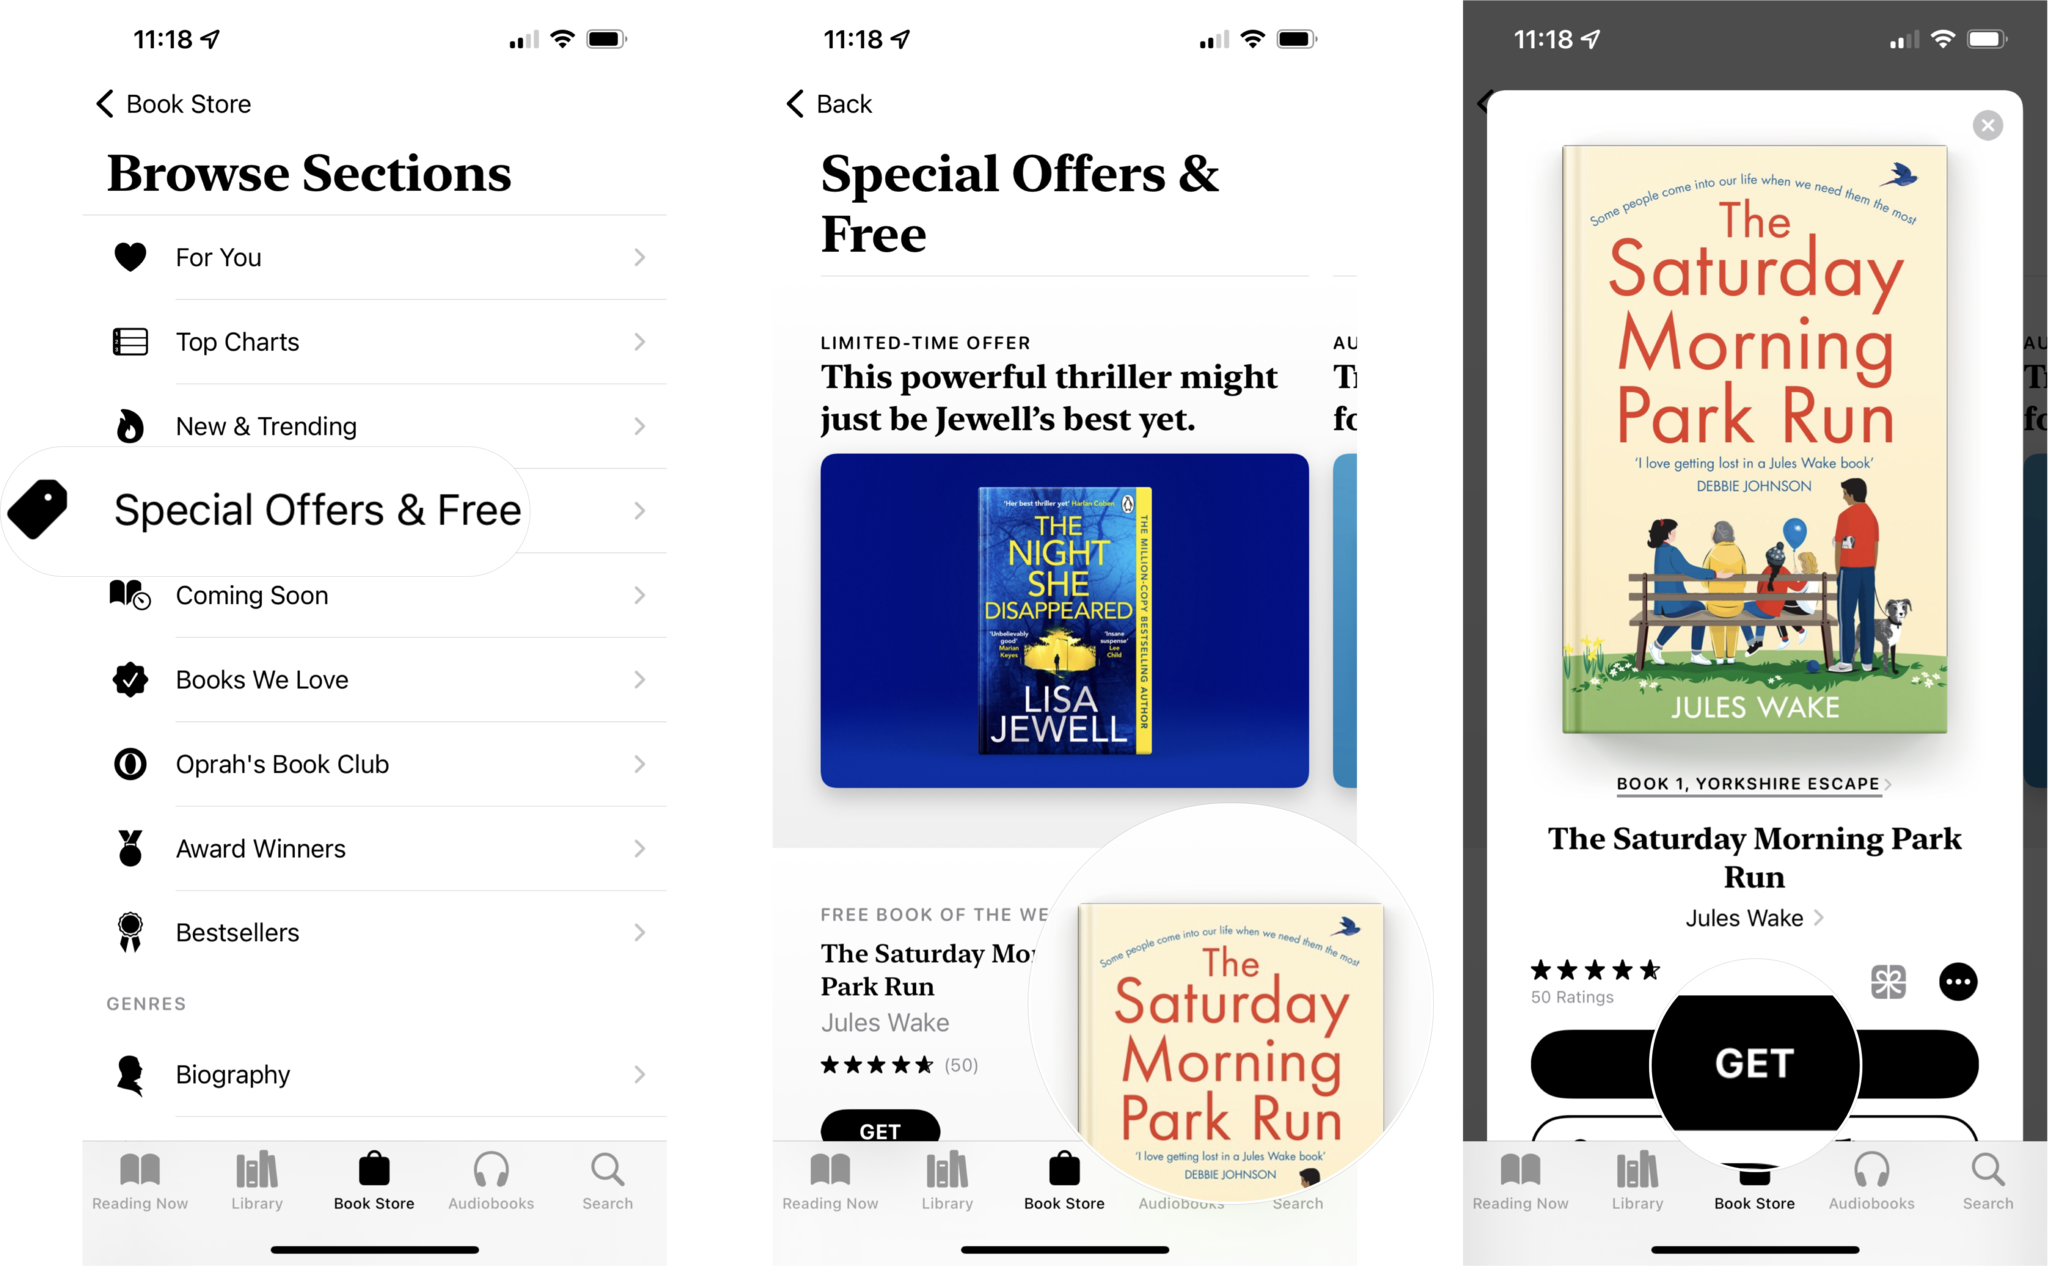 How to download a book from the Apple Book Store: Tap on a section to browse, tap on a book, tap Get if the book is free or Buy if the book has a cost